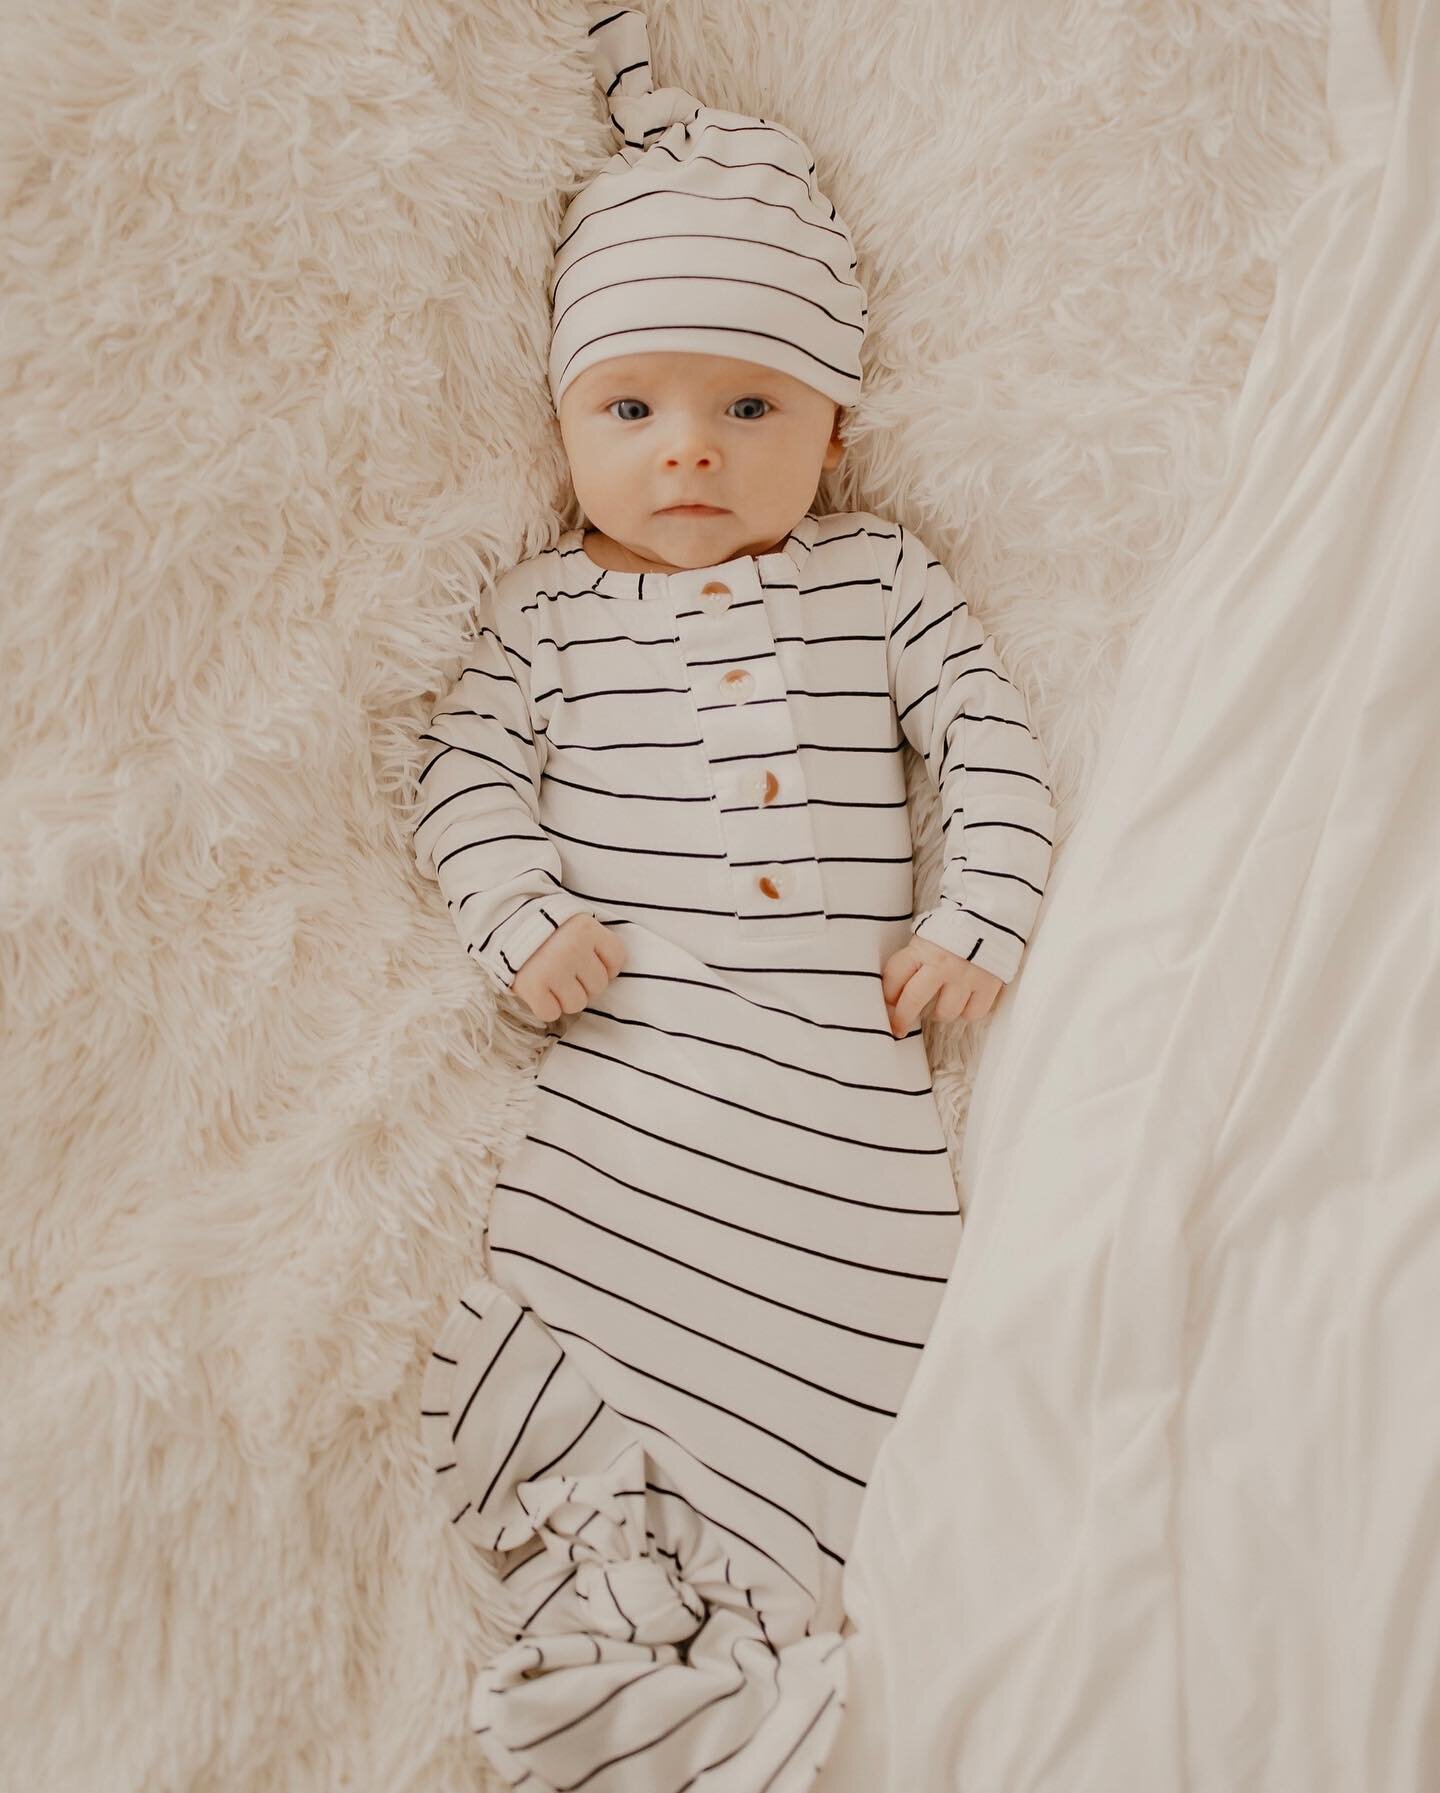 Anyone else obsessed with the way their newborns' smell? MMM there is nothing better than a fresh baby! 
⠀⠀⠀⠀⠀⠀⠀⠀⠀
Our Knotted Baby Gown Sets come with a hat or hat and headband and are made of a buttery soft 95% Modal, 5% Spandex blend. The ultra-so